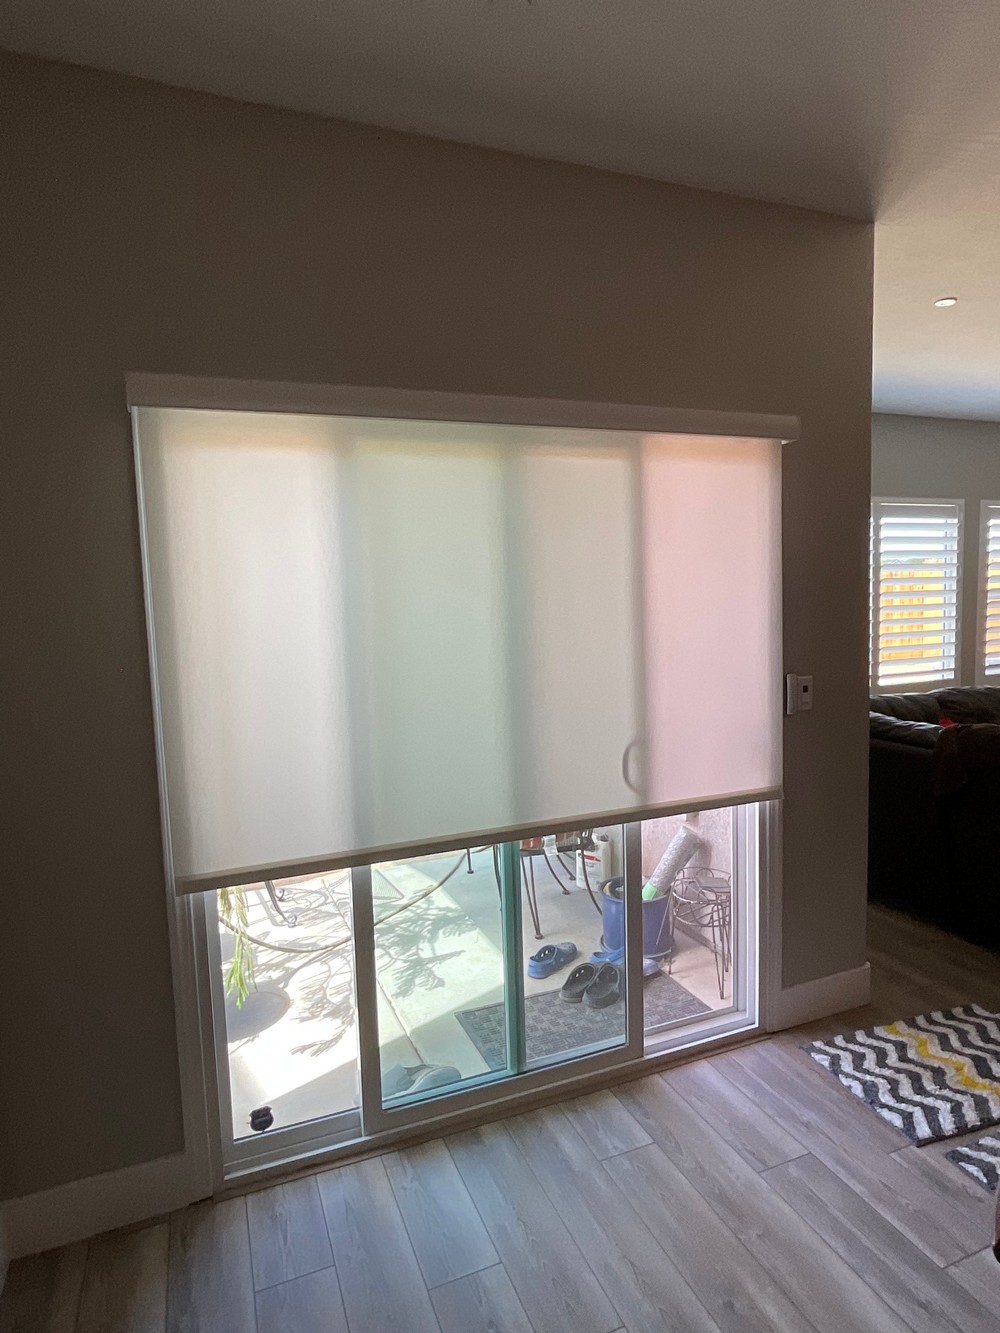 Motorized Shades, Shutters, and White Shutters in Clovis, CA